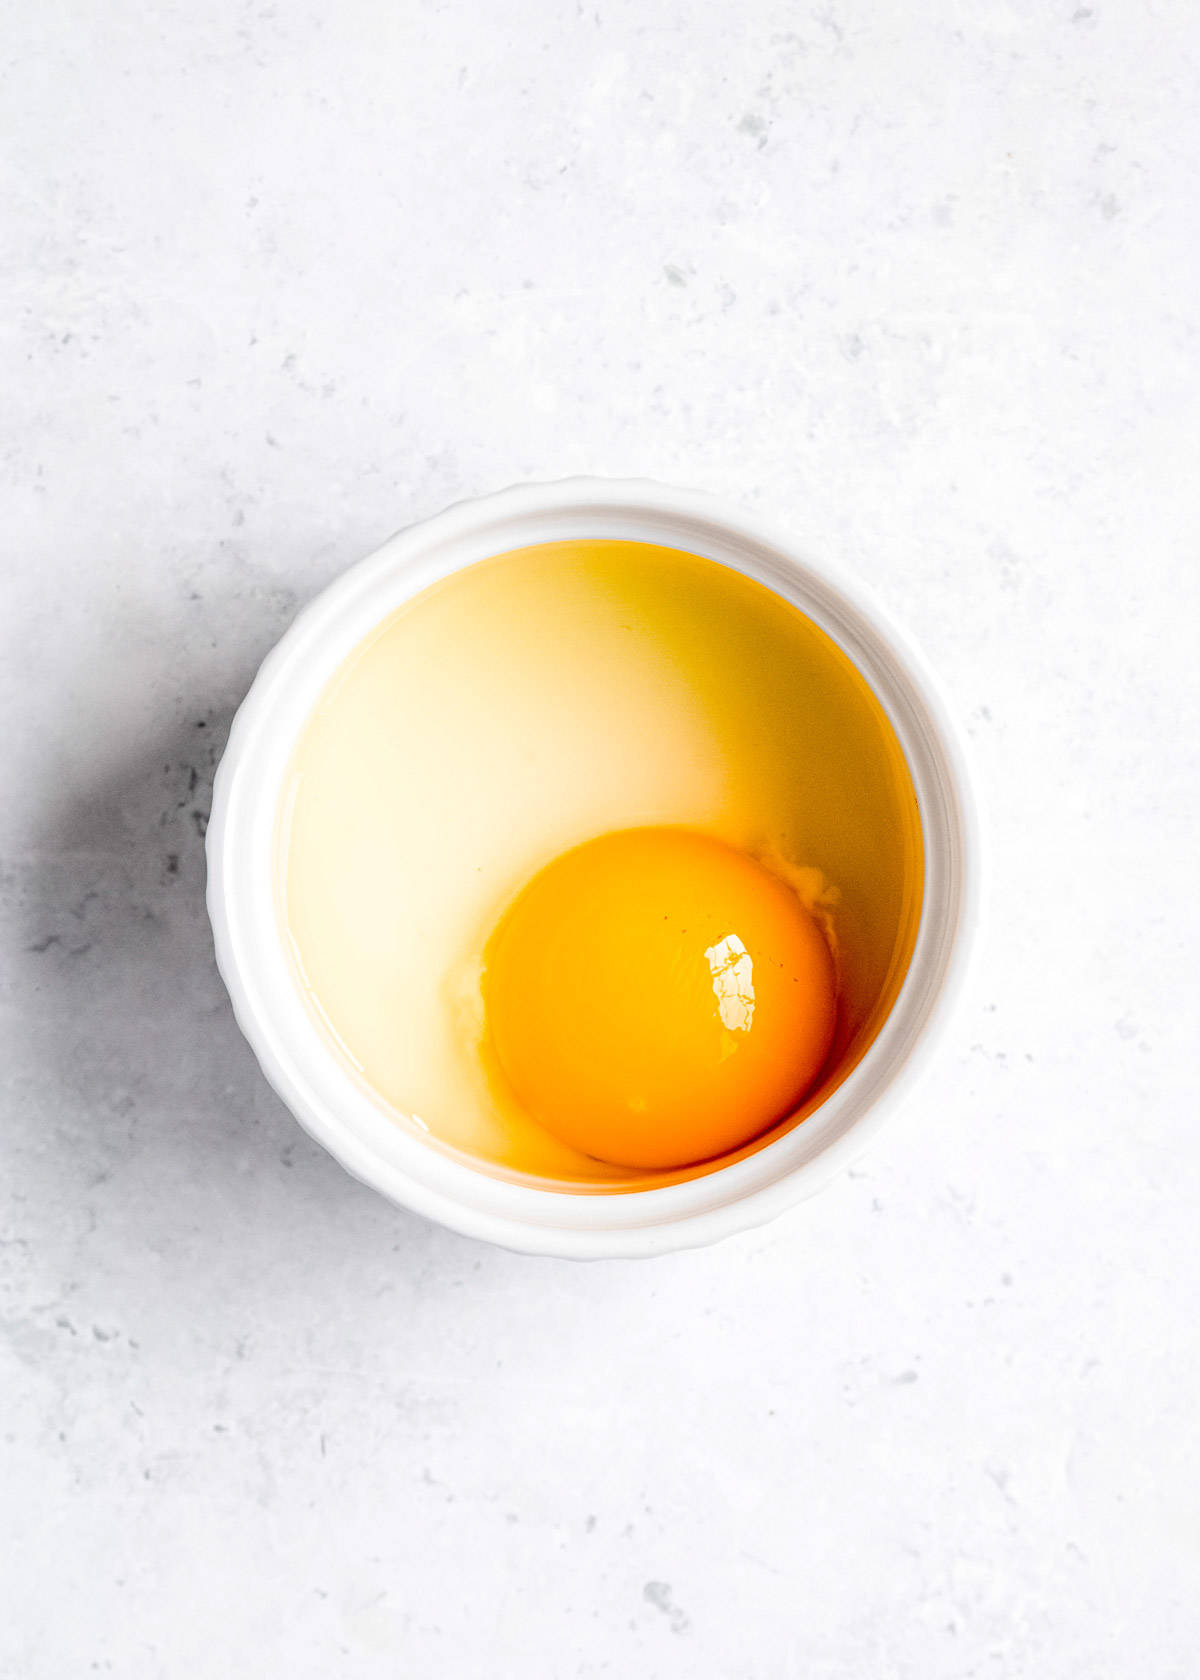 strained egg in a white bowl